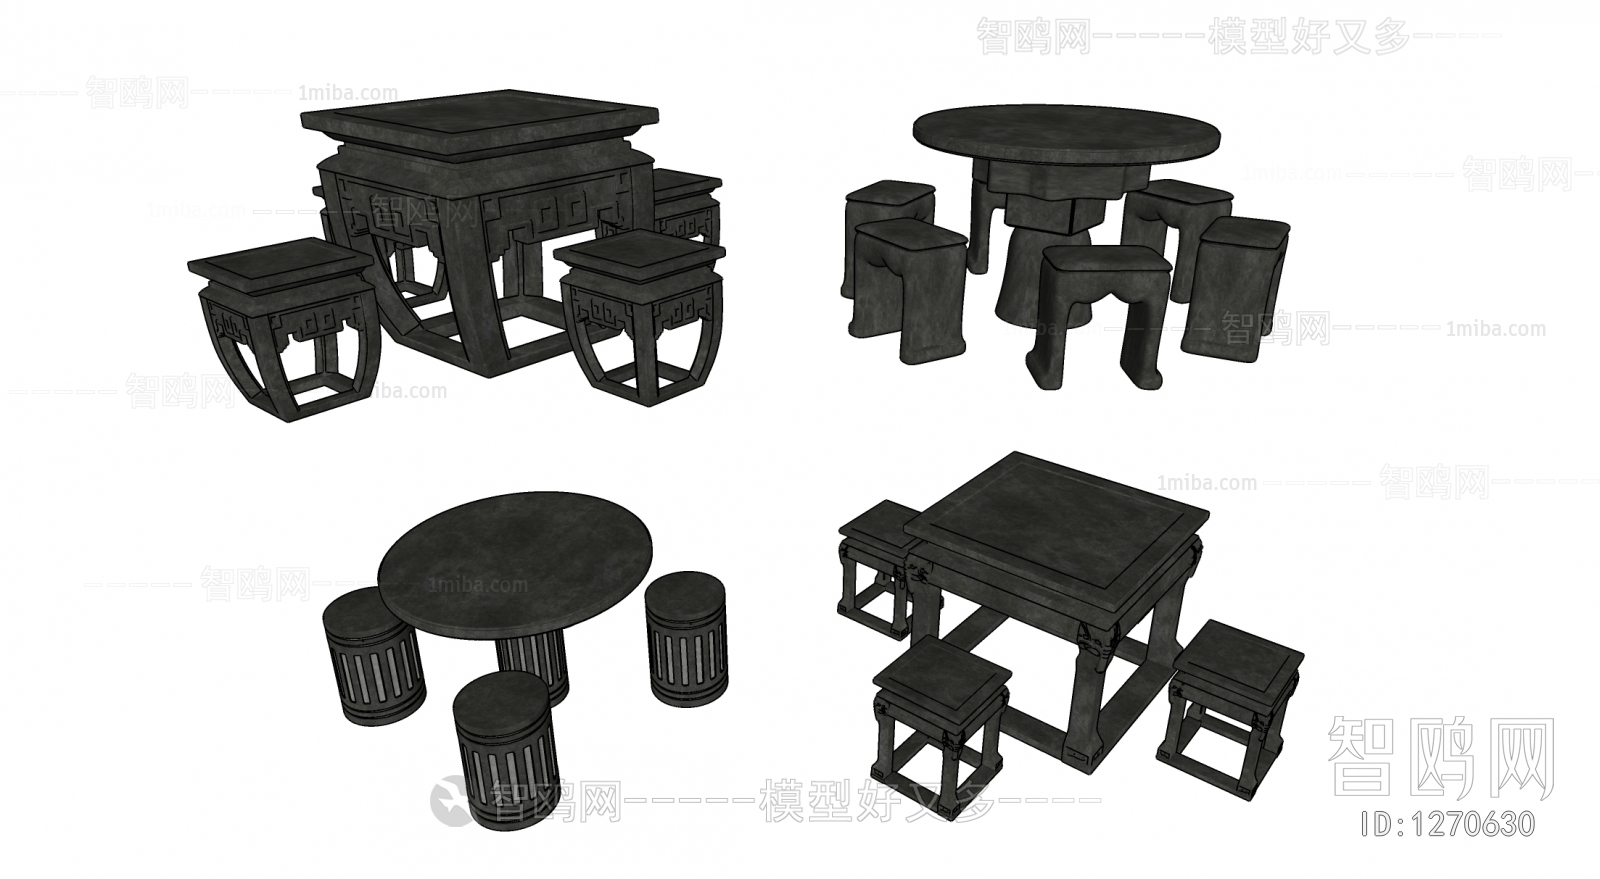 New Chinese Style Outdoor Tables And Chairs